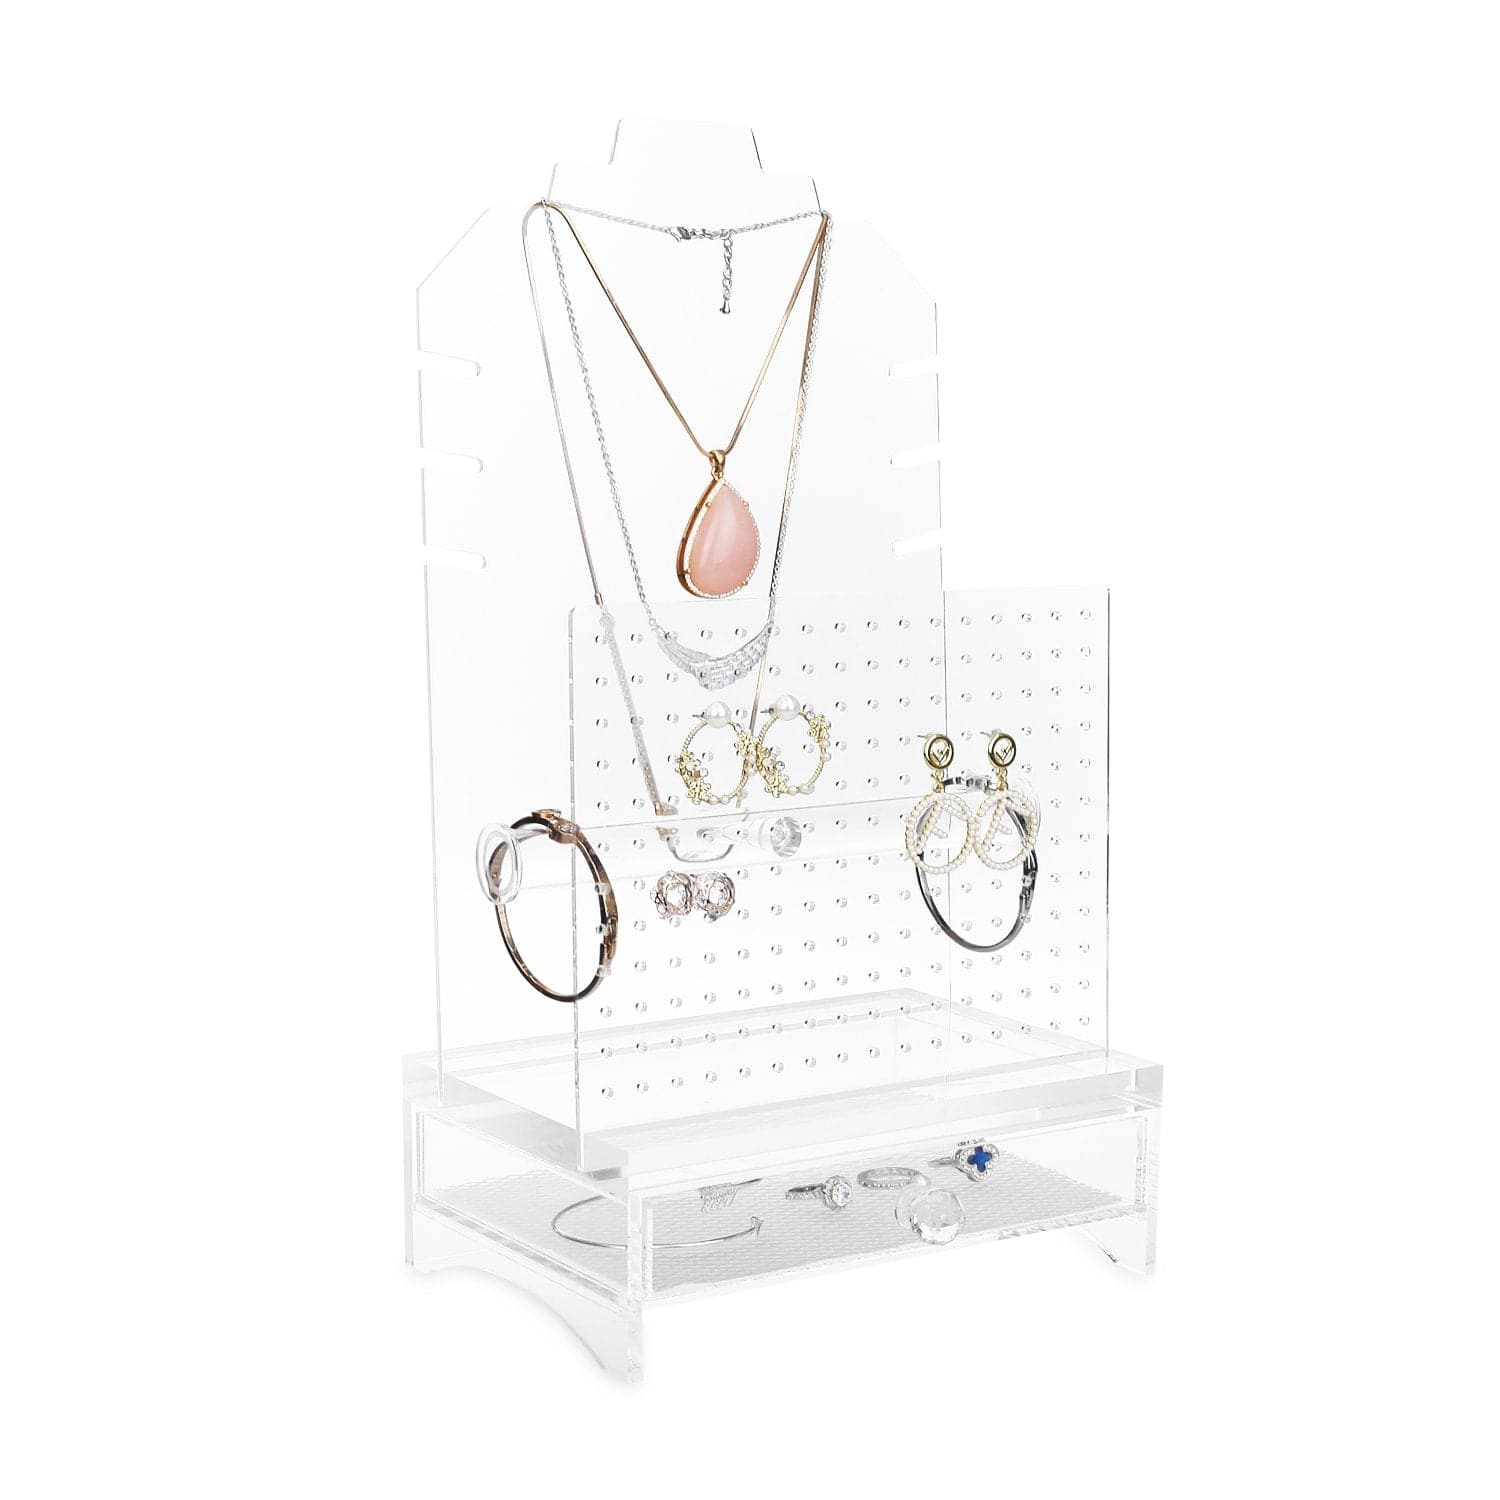 Plymor Clear Acrylic Rotating Necklace / Keychain Display Stand Holder, 21  H x 8 W x 8 D (Has 8 Hooks for Necklaces)